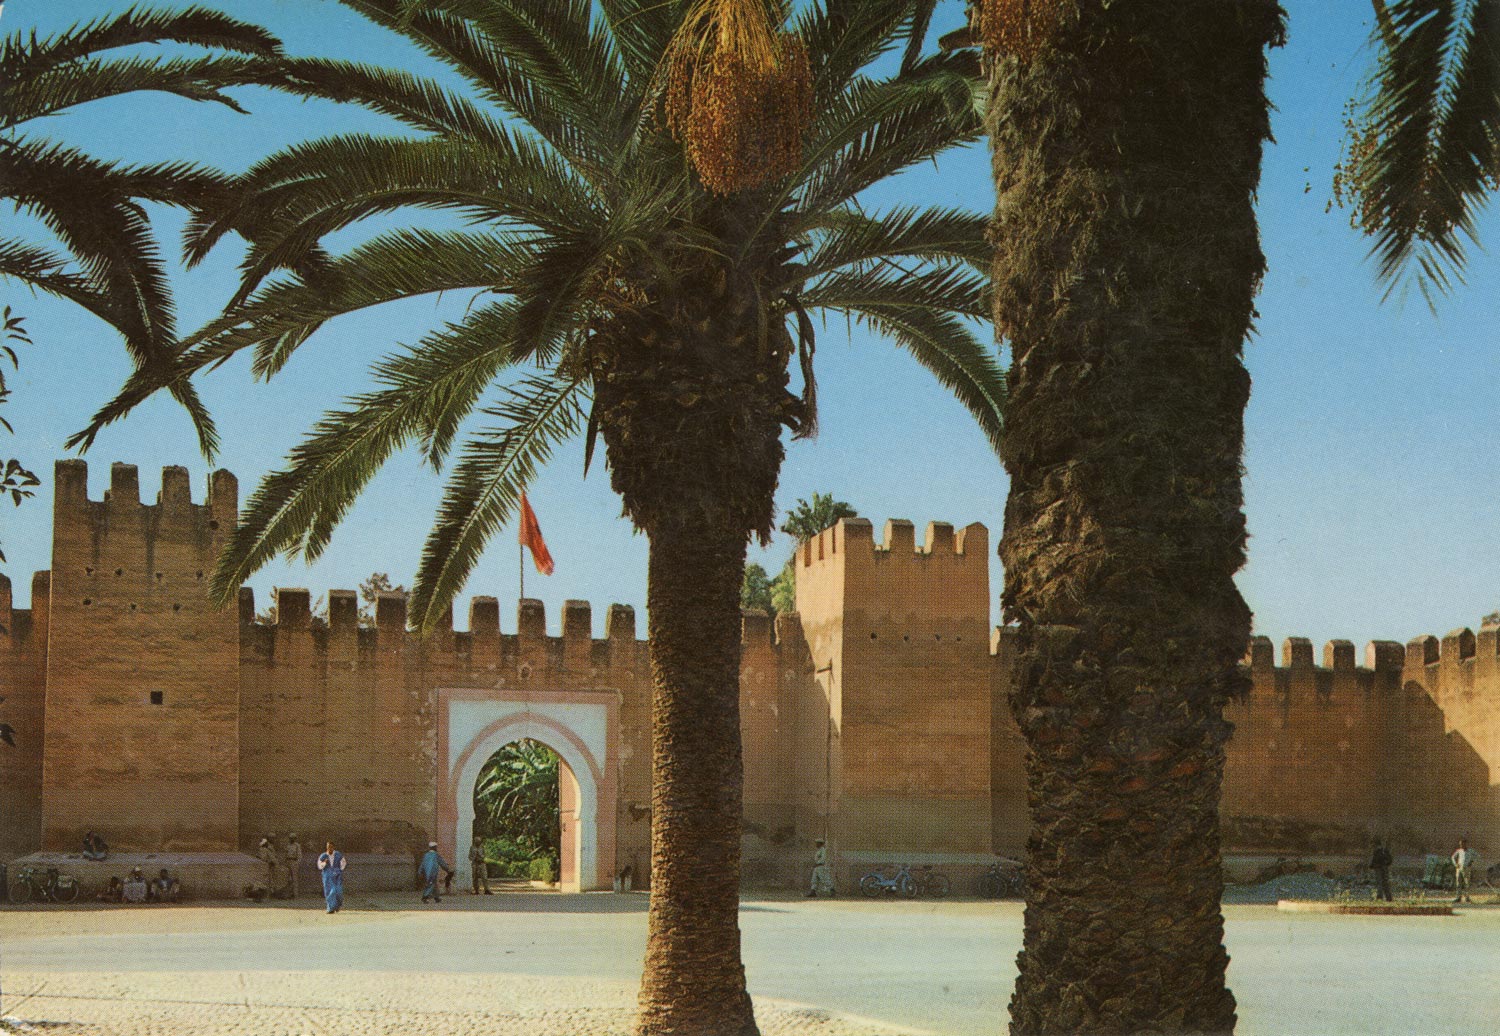 View of palm trees, walls, and towers